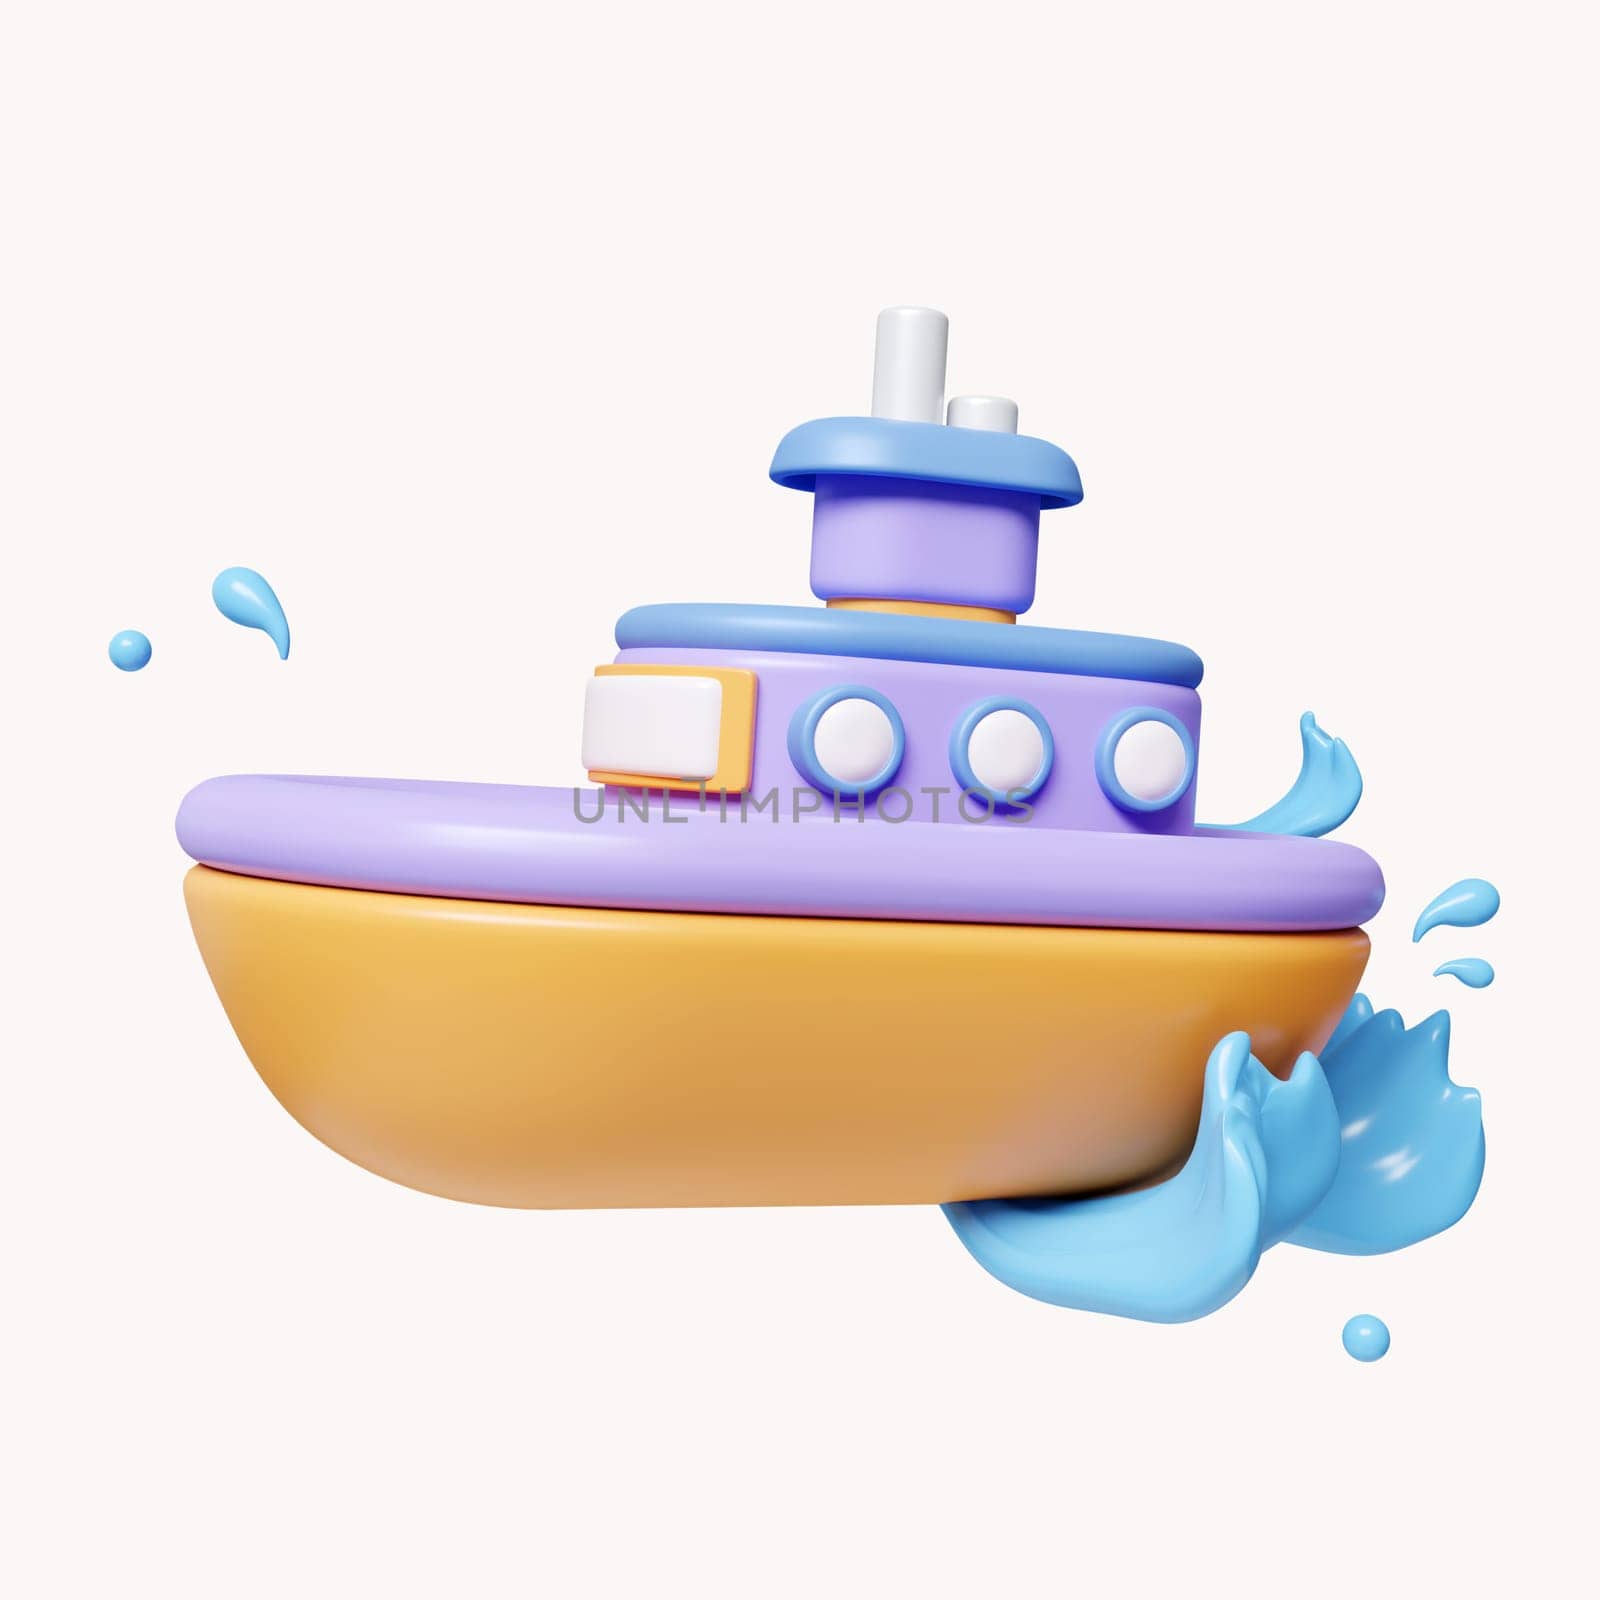 3D Cruise ship with ocean .time to travel. summer vacation and holidays concept. icon isolated on white background. 3d rendering illustration. Clipping path. by meepiangraphic